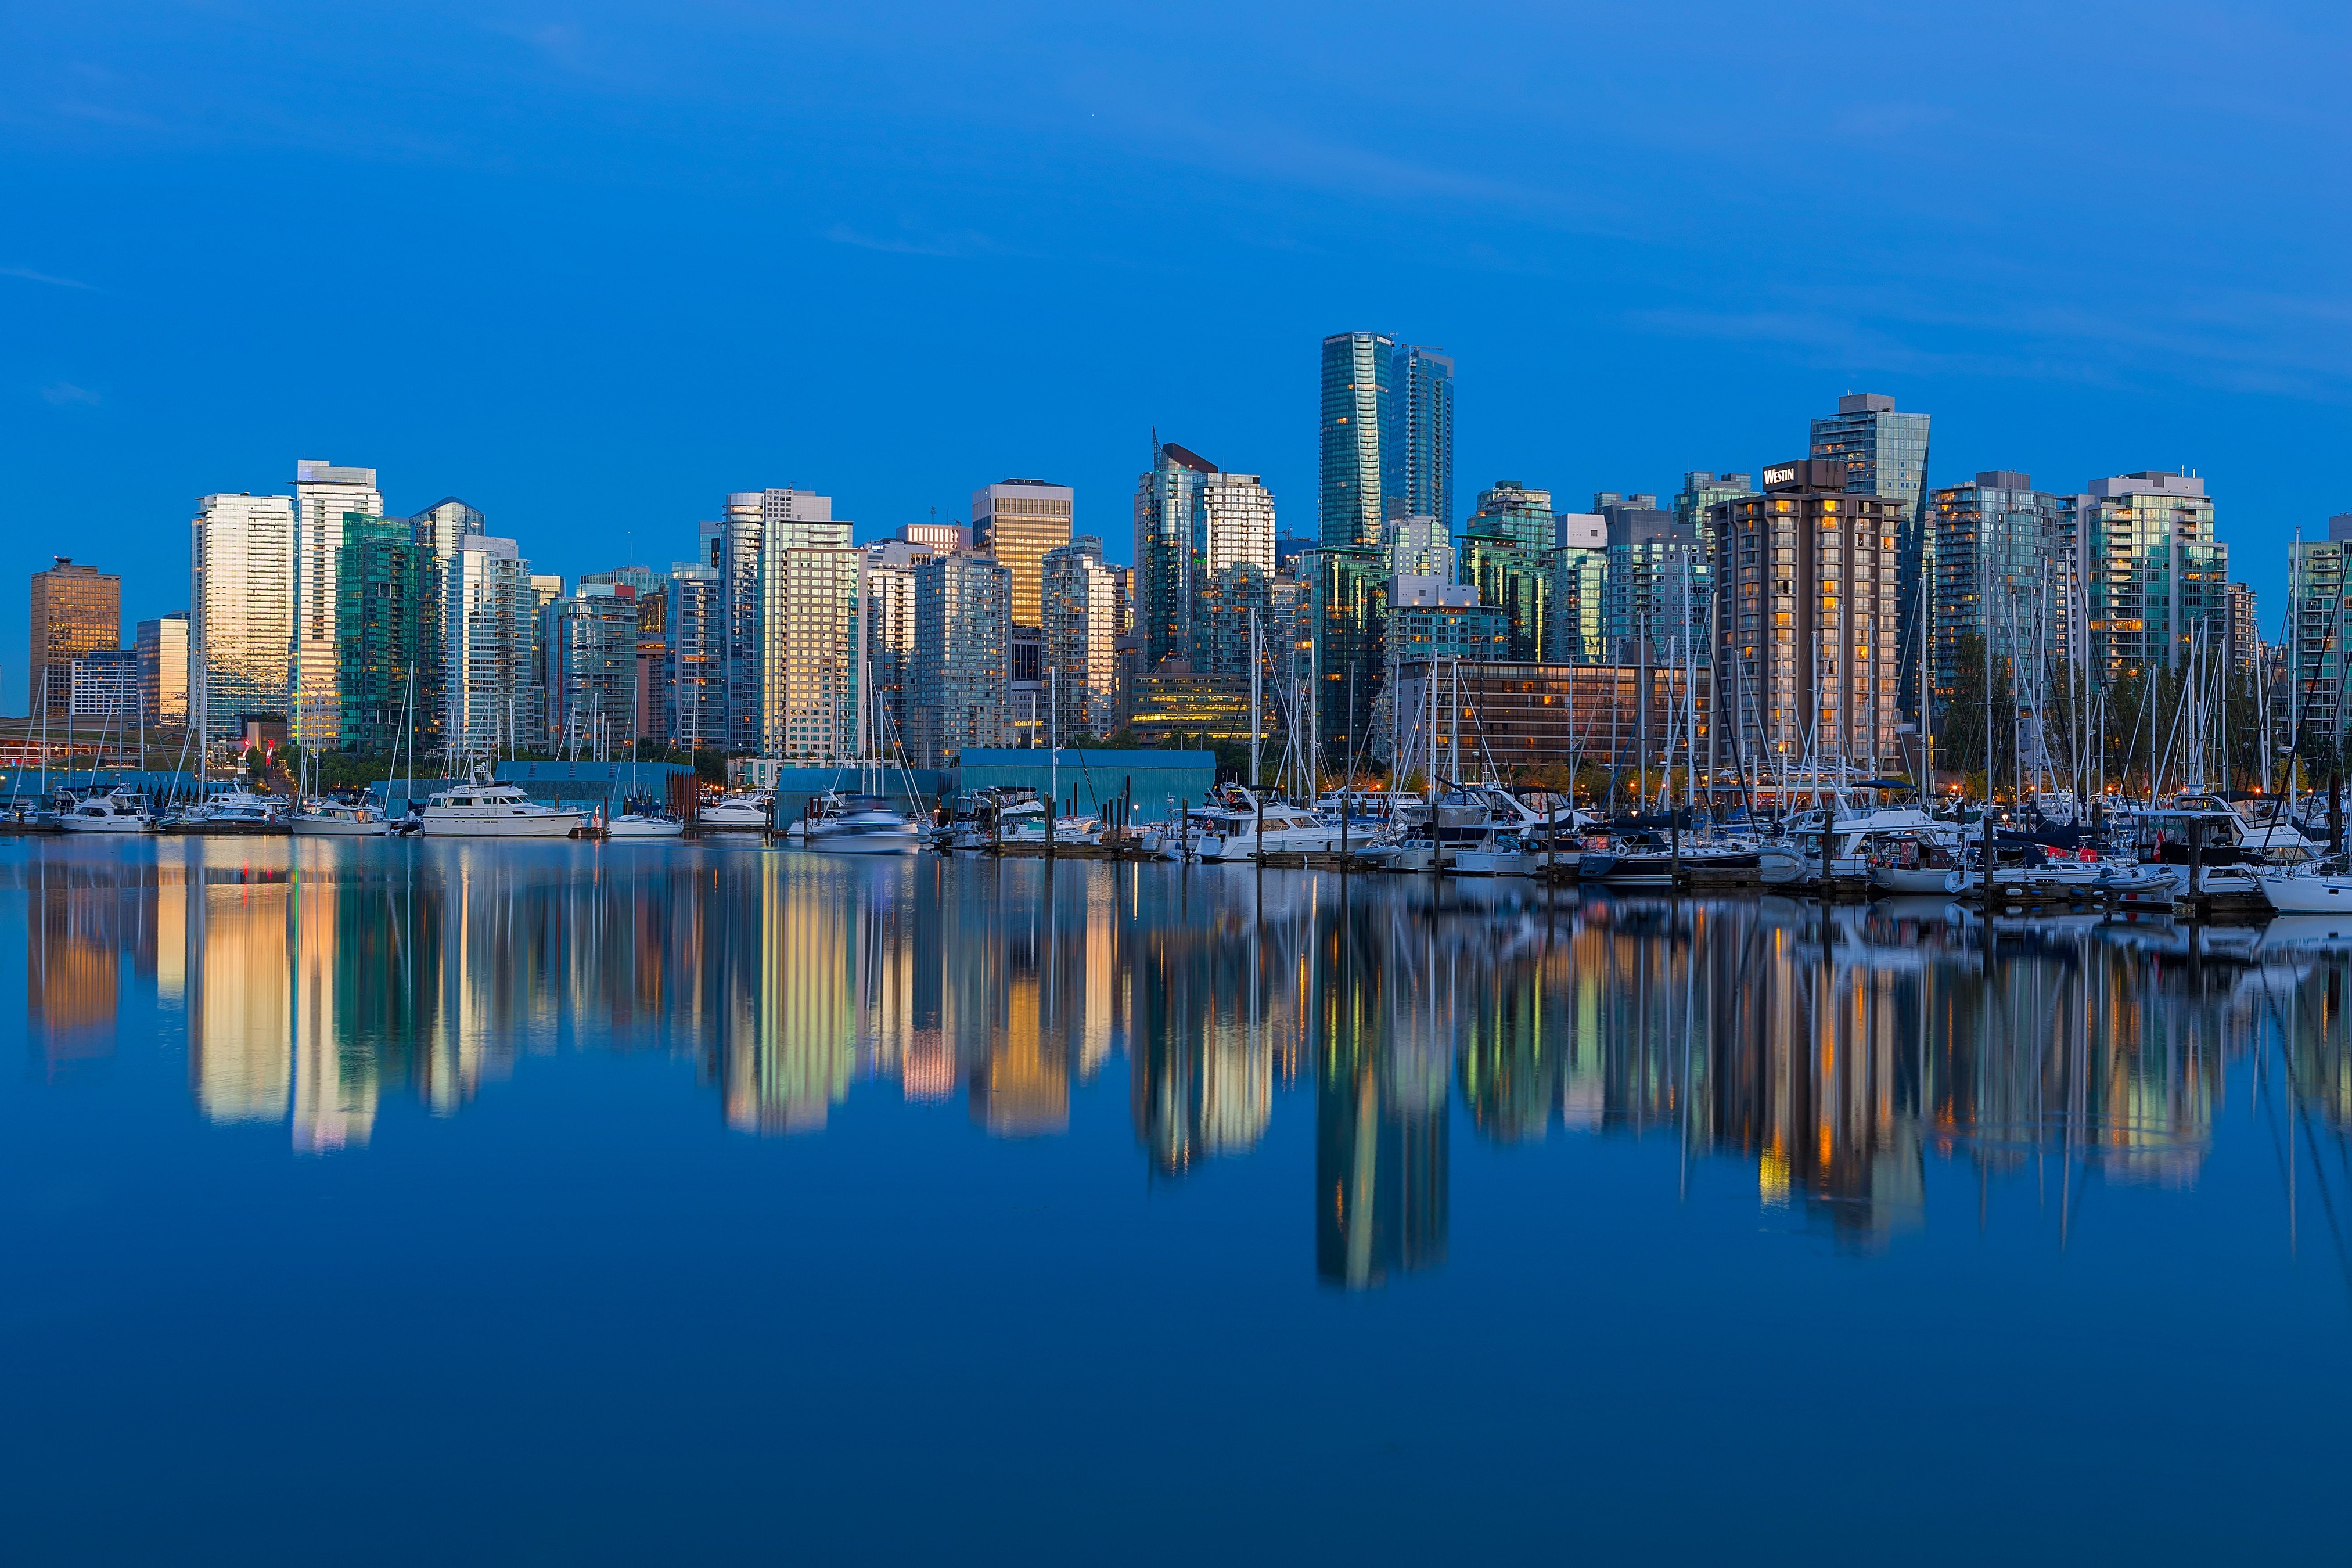 Analysts remain bullish about Vancouver commercial property. ‘While further softening in the residential market is anticipated, this should not translate into weaker commercial real-estate prices or values,’ says Stuart Barron of Cushman & Wakefield. Photo: Shutterstock